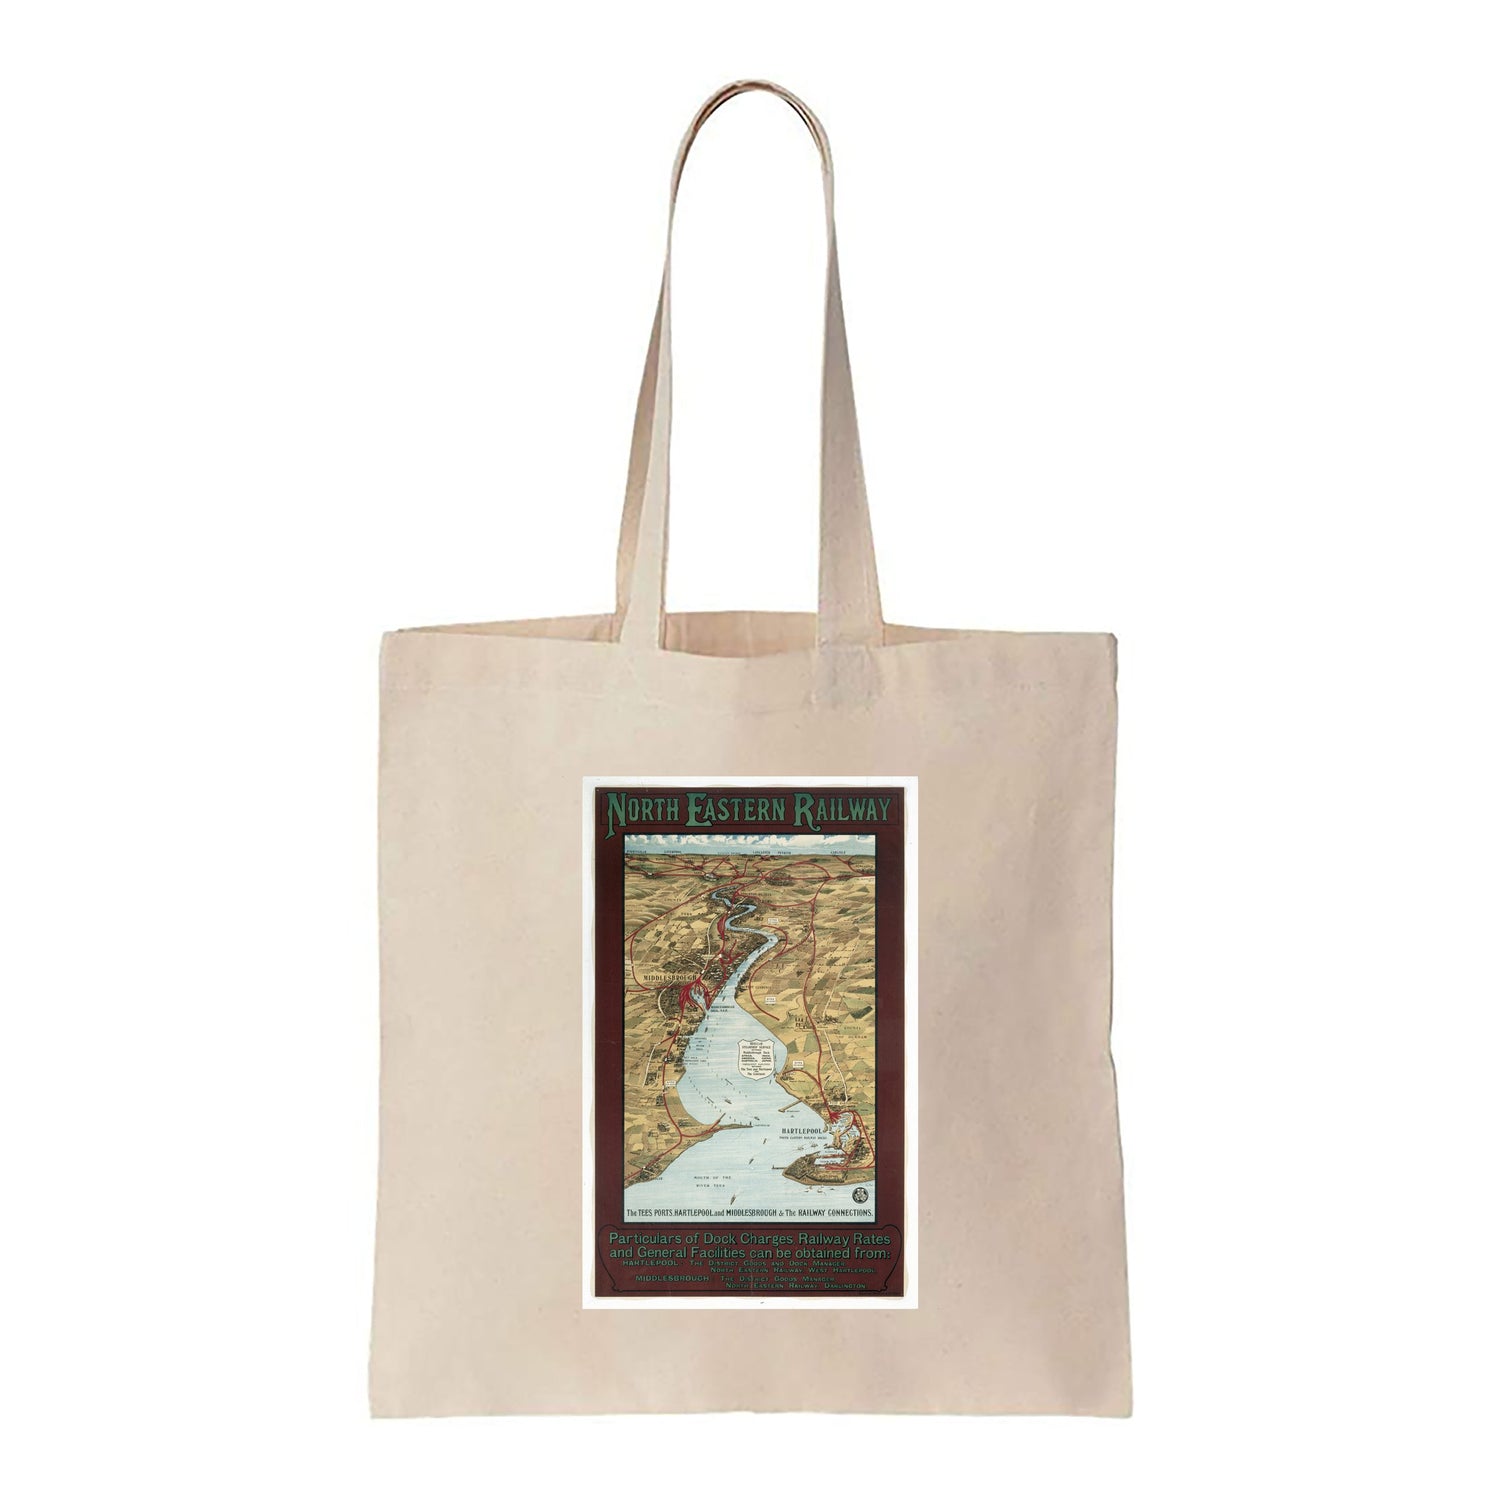 The Tees Ports - Middlesbrough, Hartlepool - Canvas Tote Bag